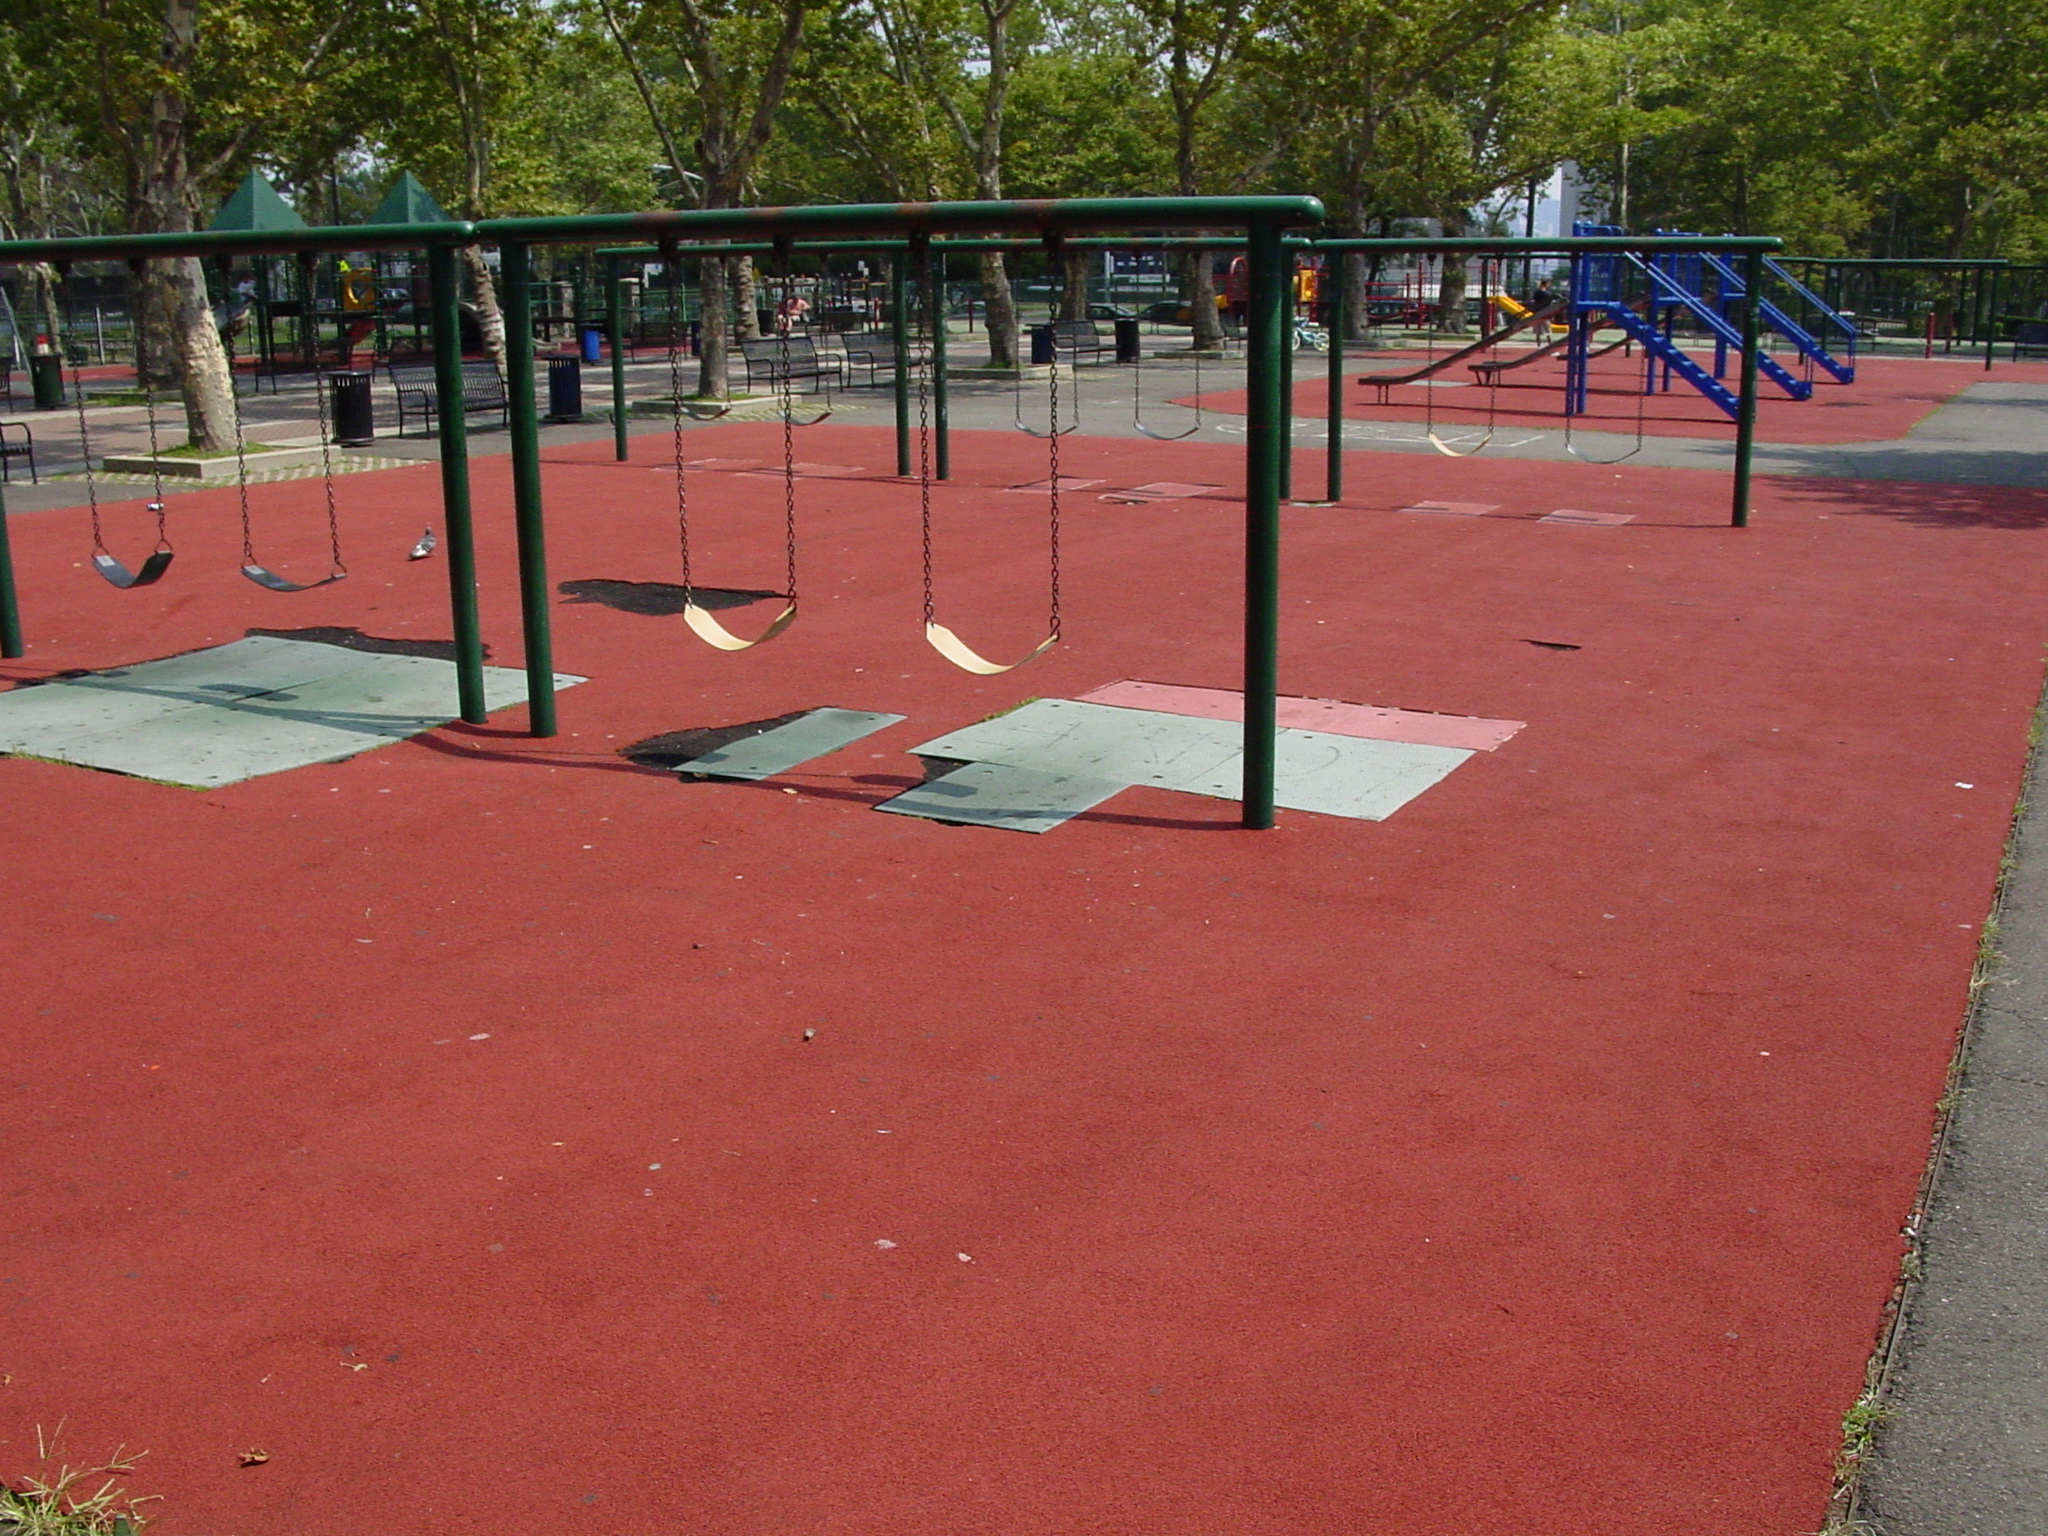 Large Public Park with Multiple Playgrounds Using Designs e